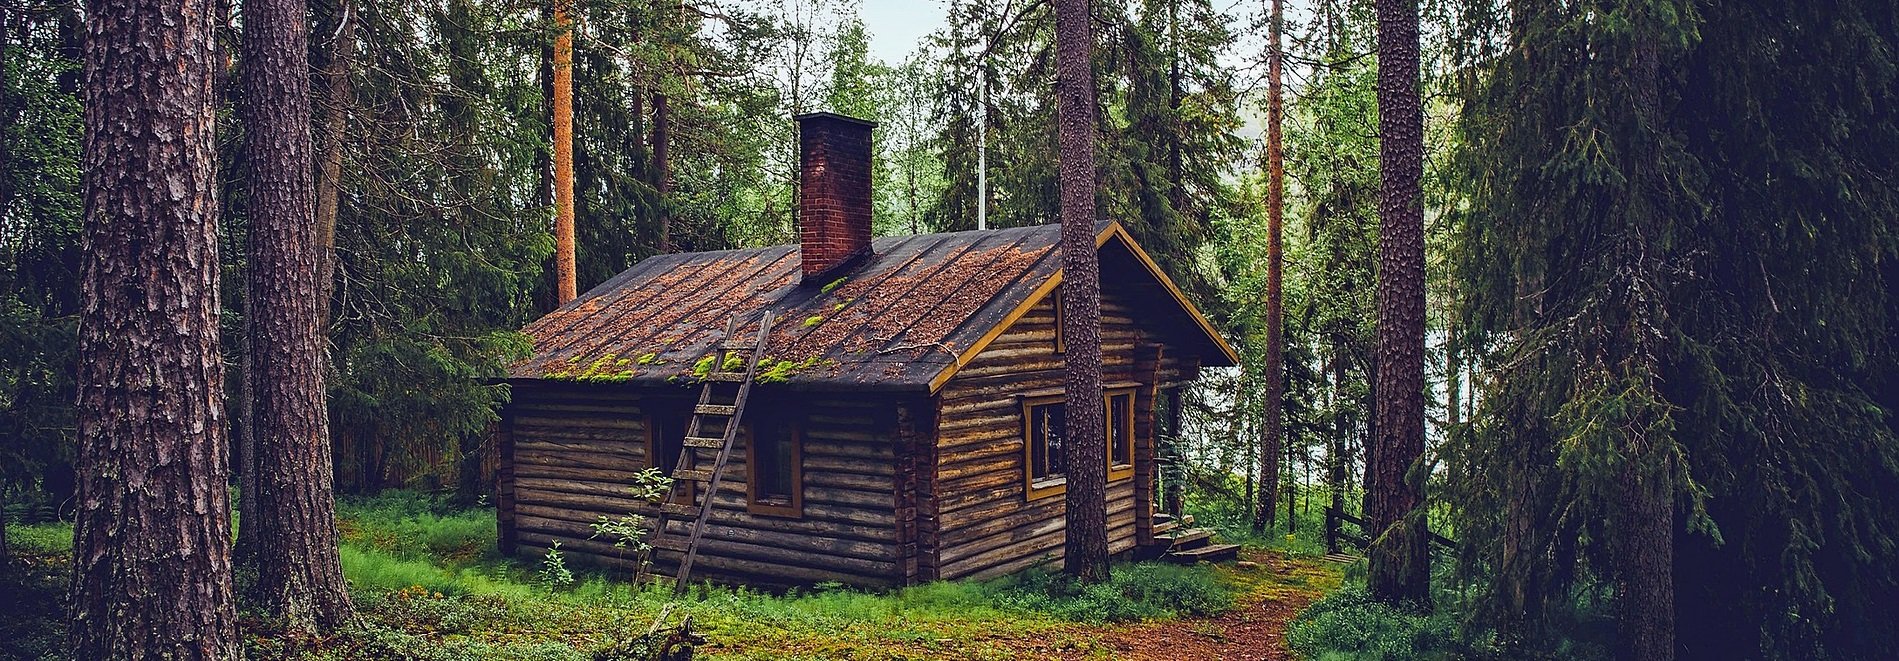 A log cabin in the woods with a lake in the background